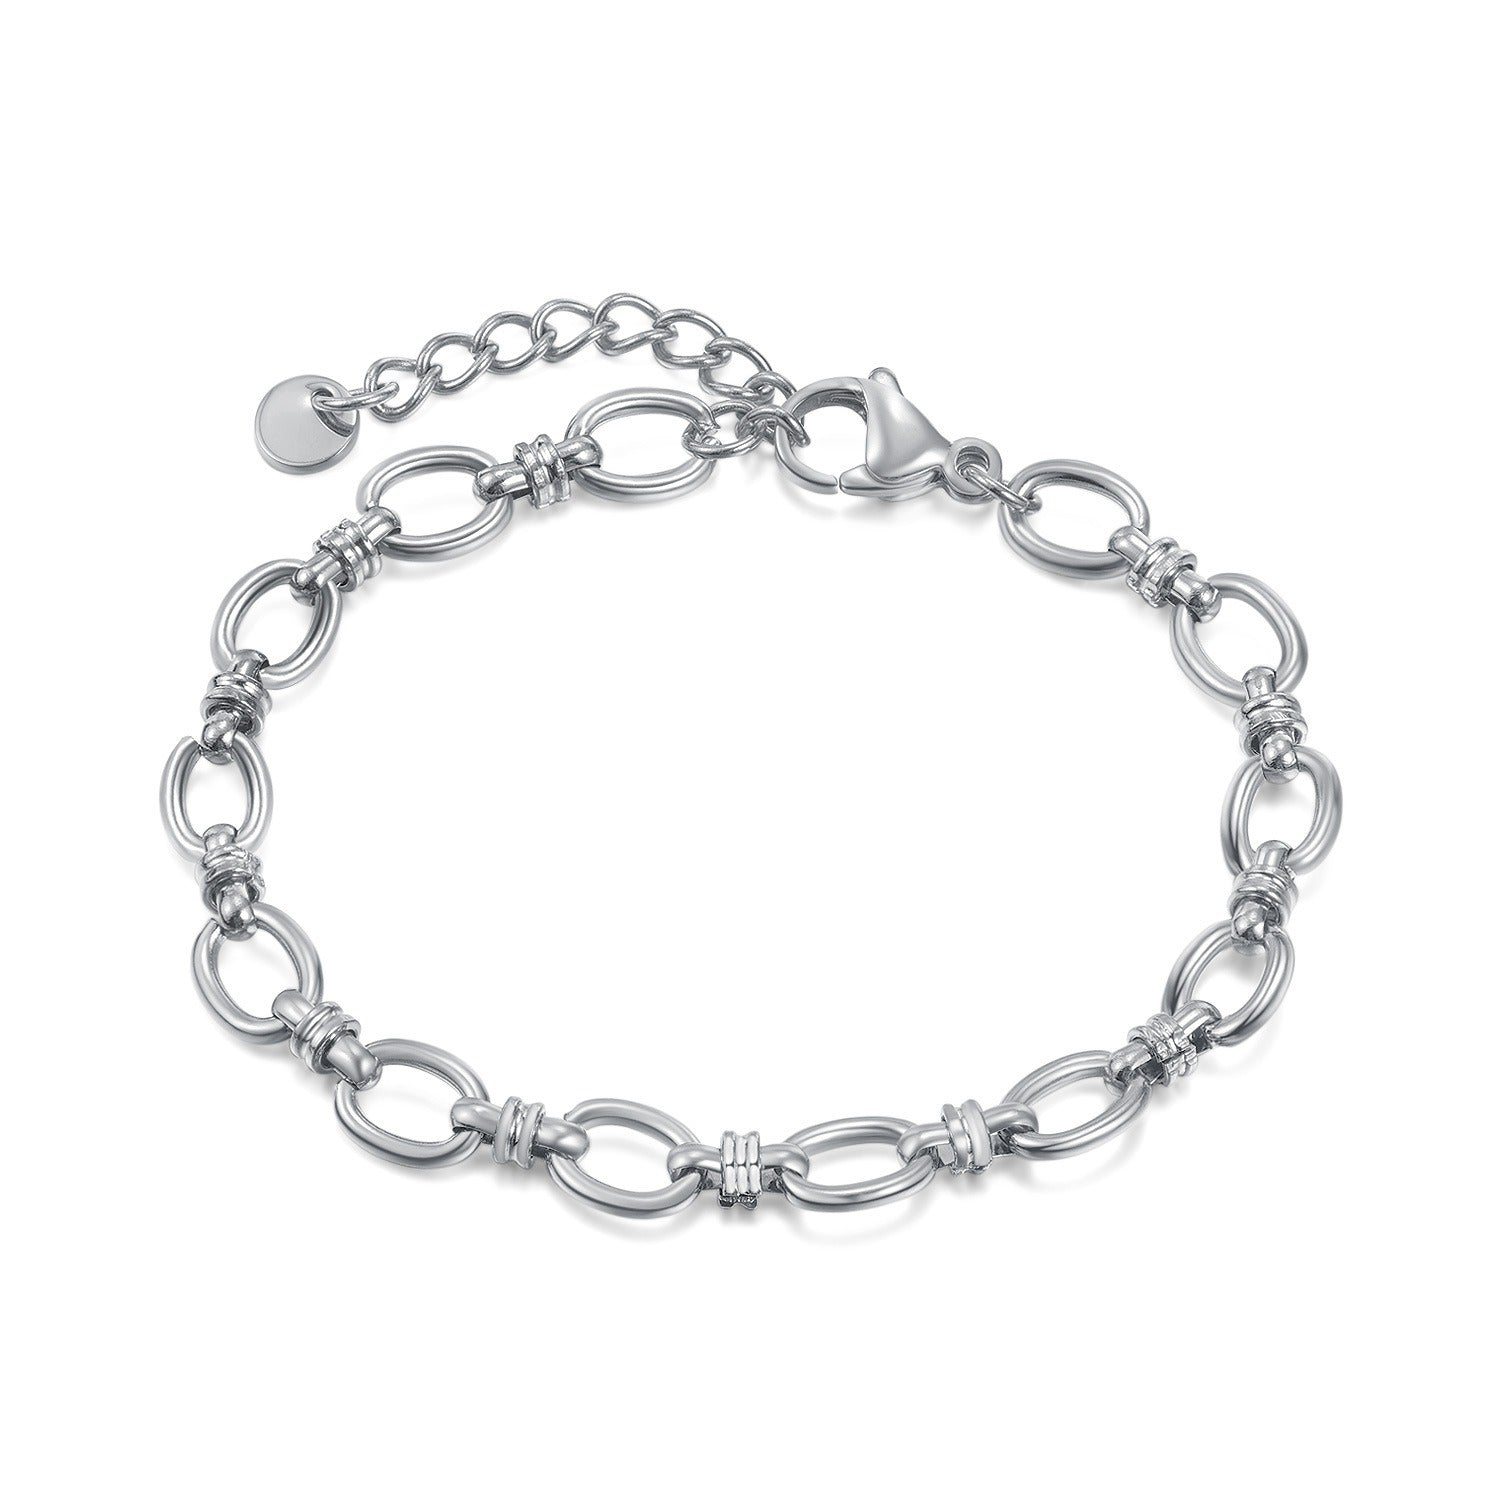 European and American fashionable stainless steel plain chain